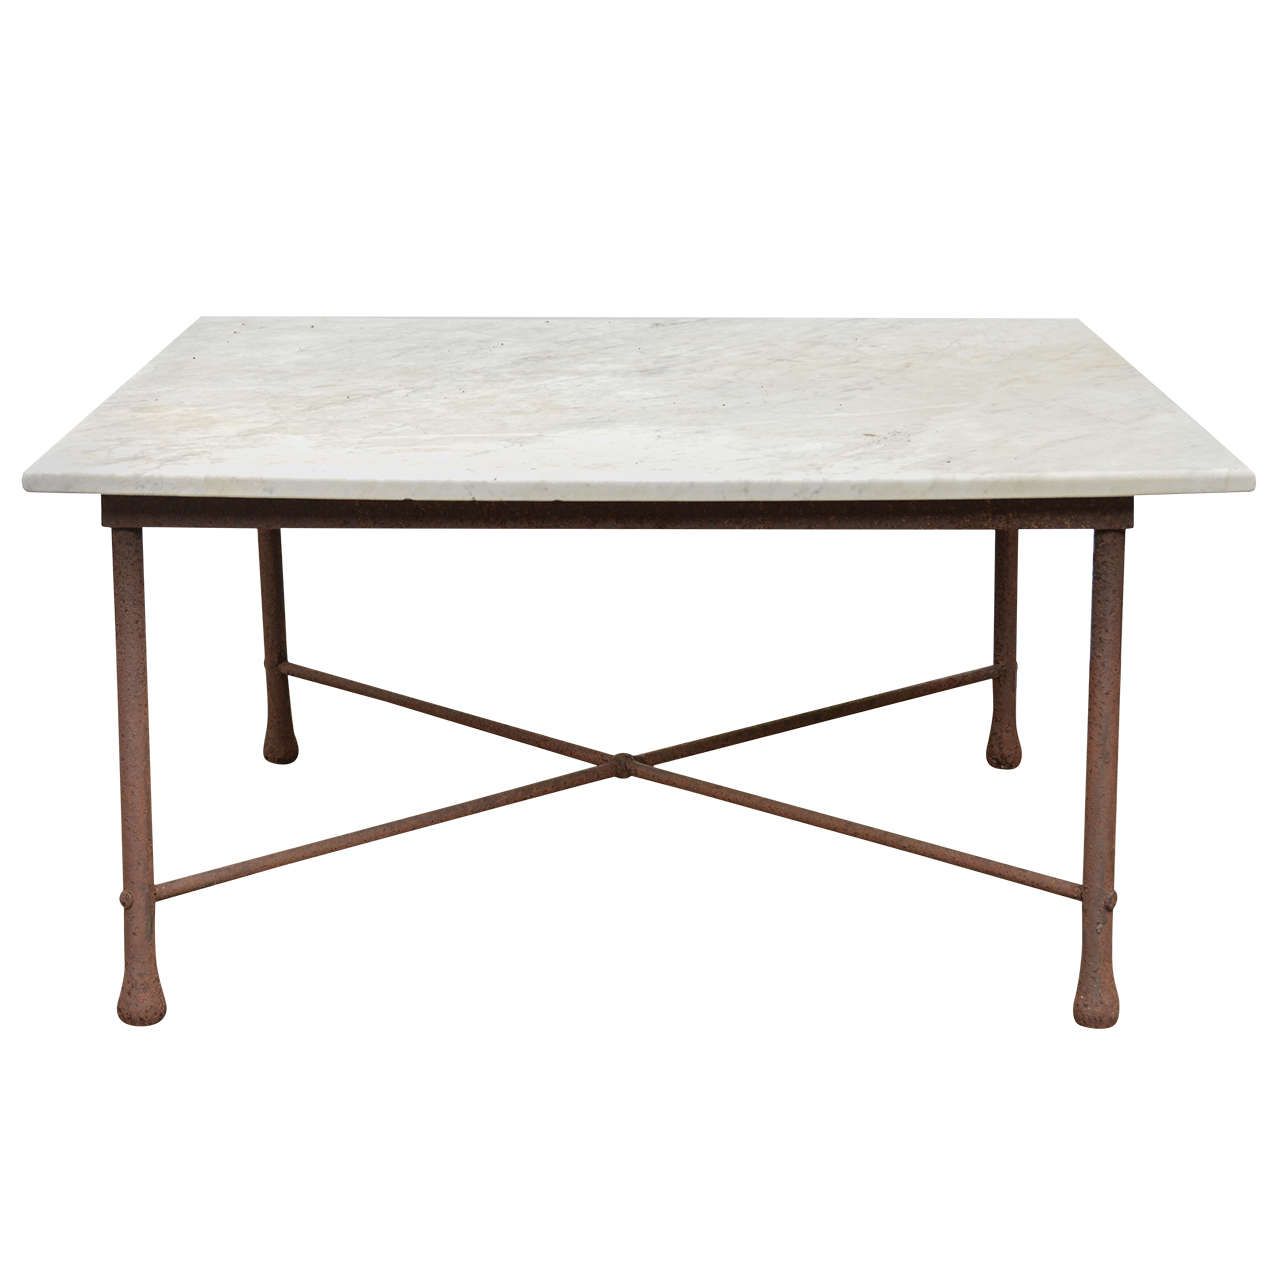 American 1970s Wrought Iron Coffee Table With Marble Top For Sale At With Iron And White Marble Desks (View 4 of 15)